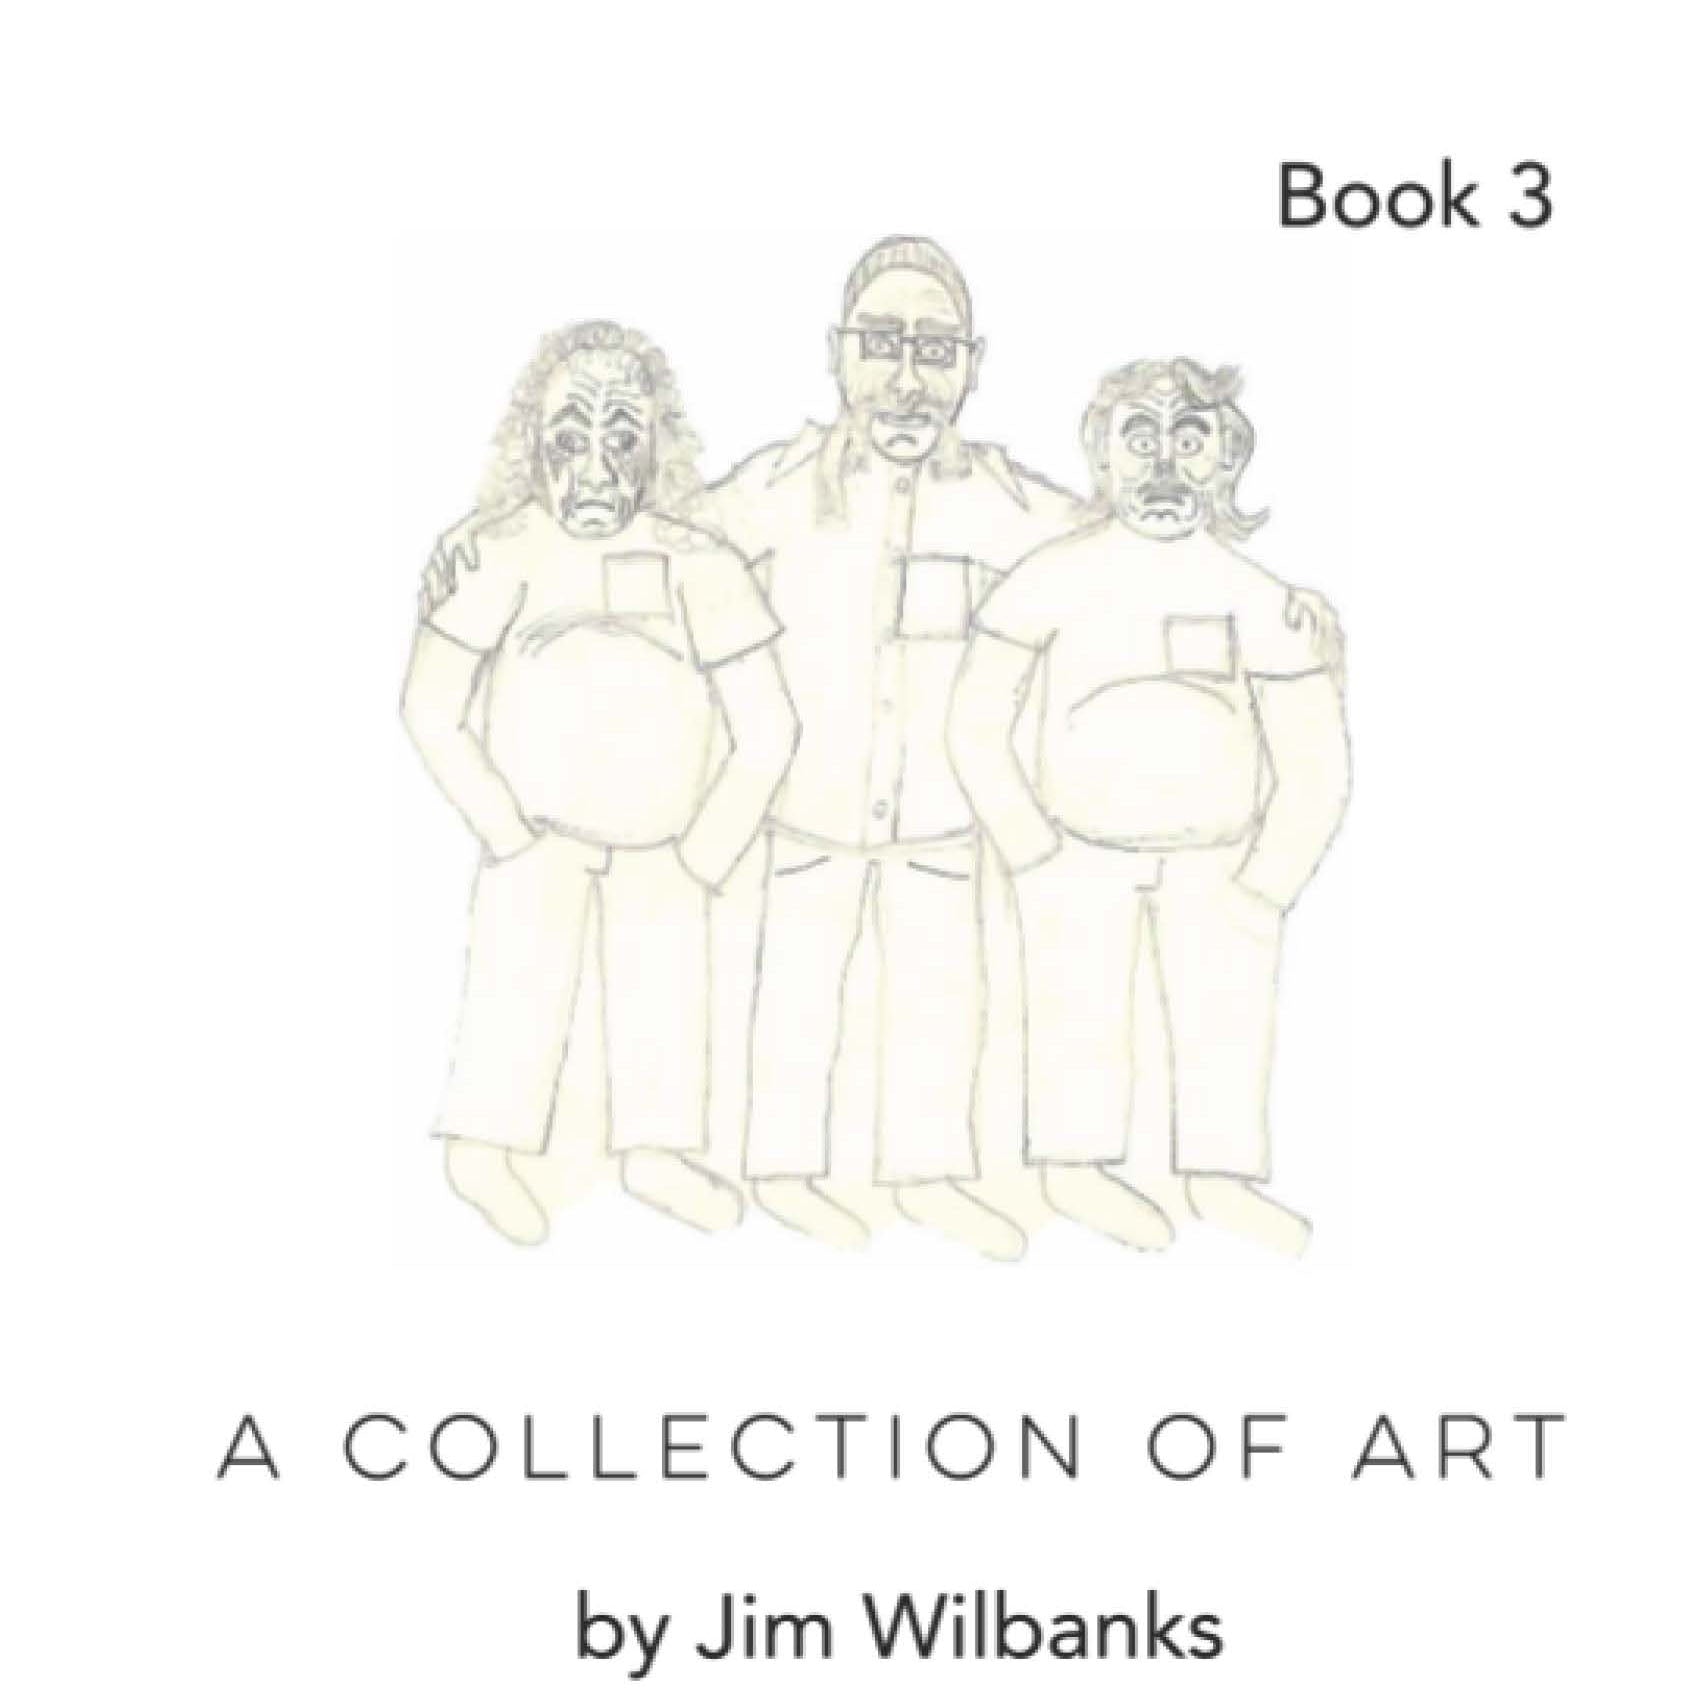 WATCH Resources Art Guild - A Collection of Art by Jim Wilbanks, 6x6 book 3, 20 pages, Hardback